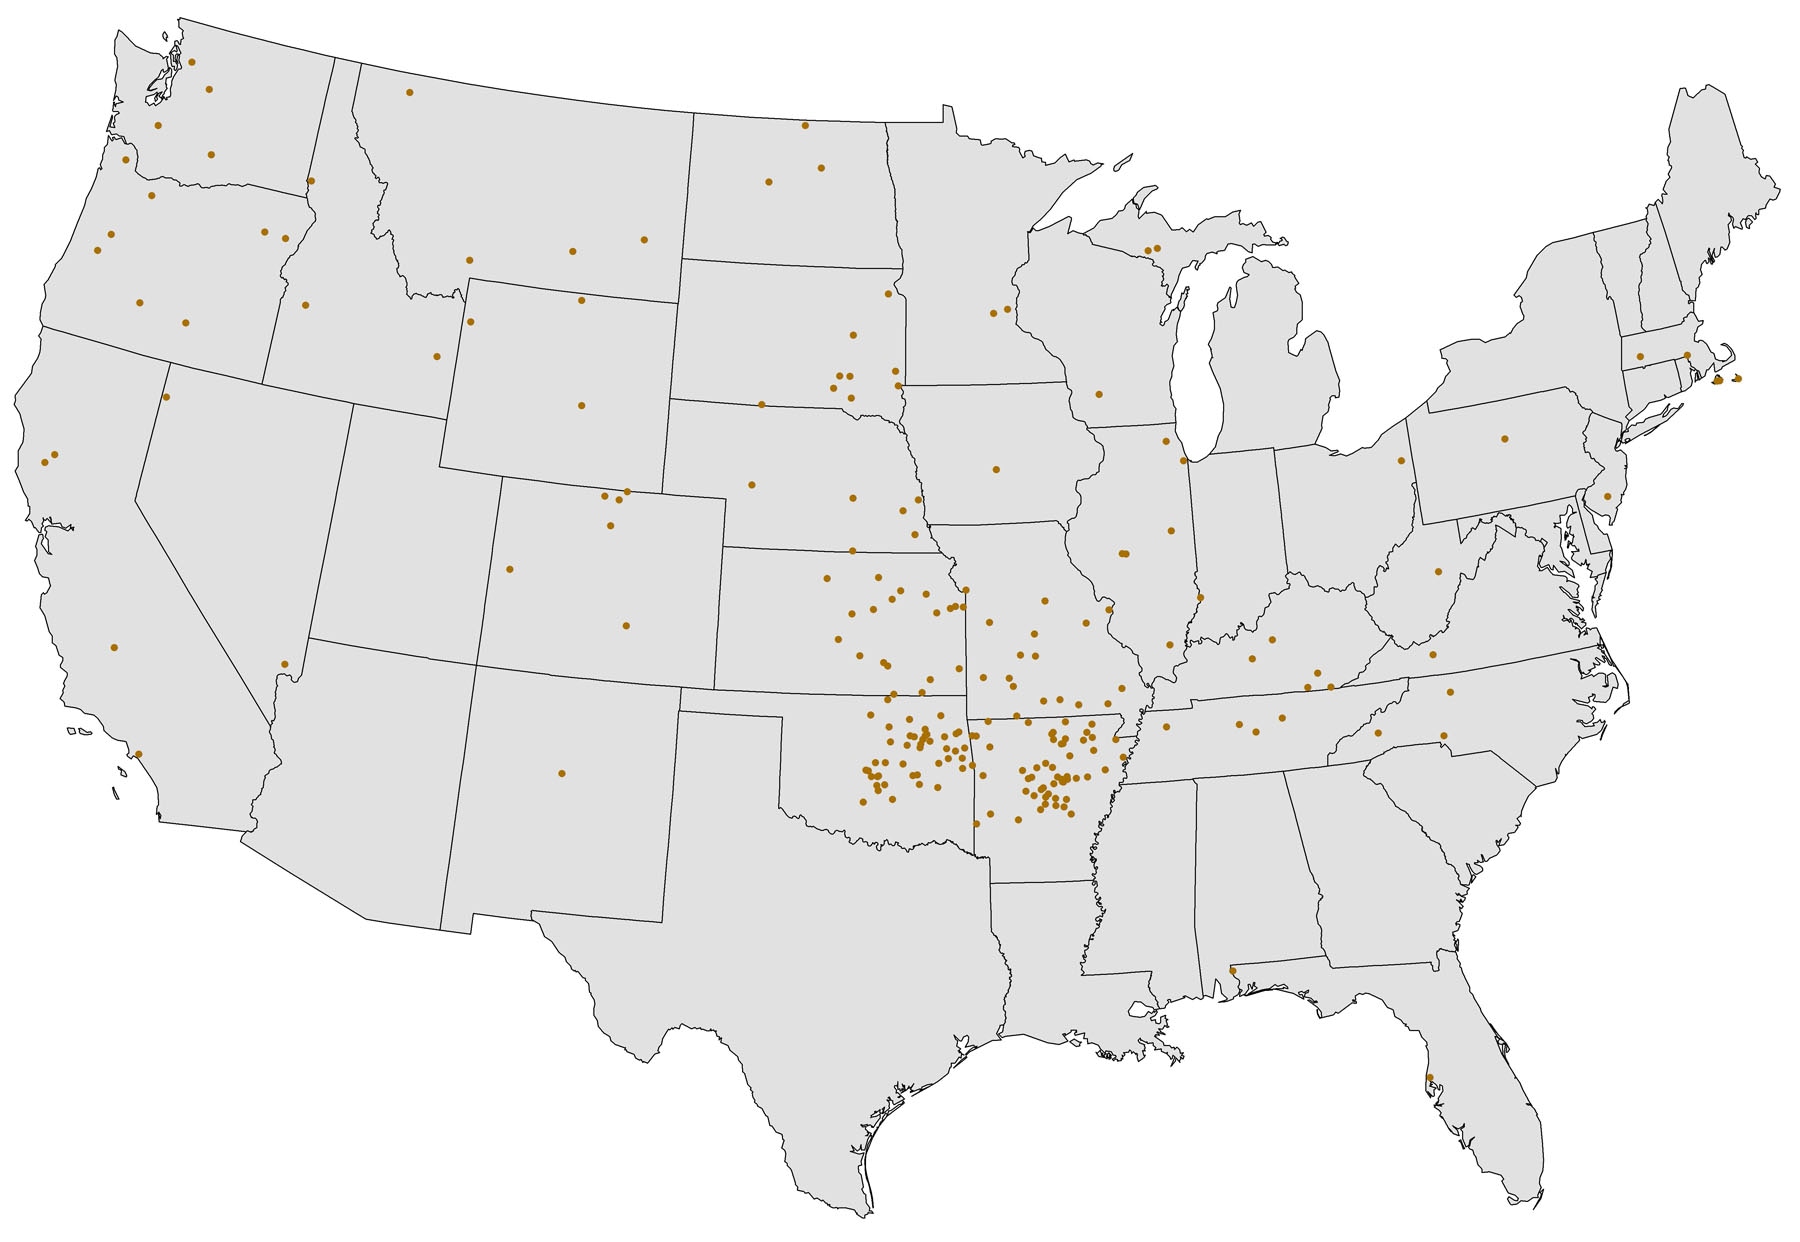 US map showing where cases of Tularemia have been reported. Cases are concentrated in the middle part of the U.S.